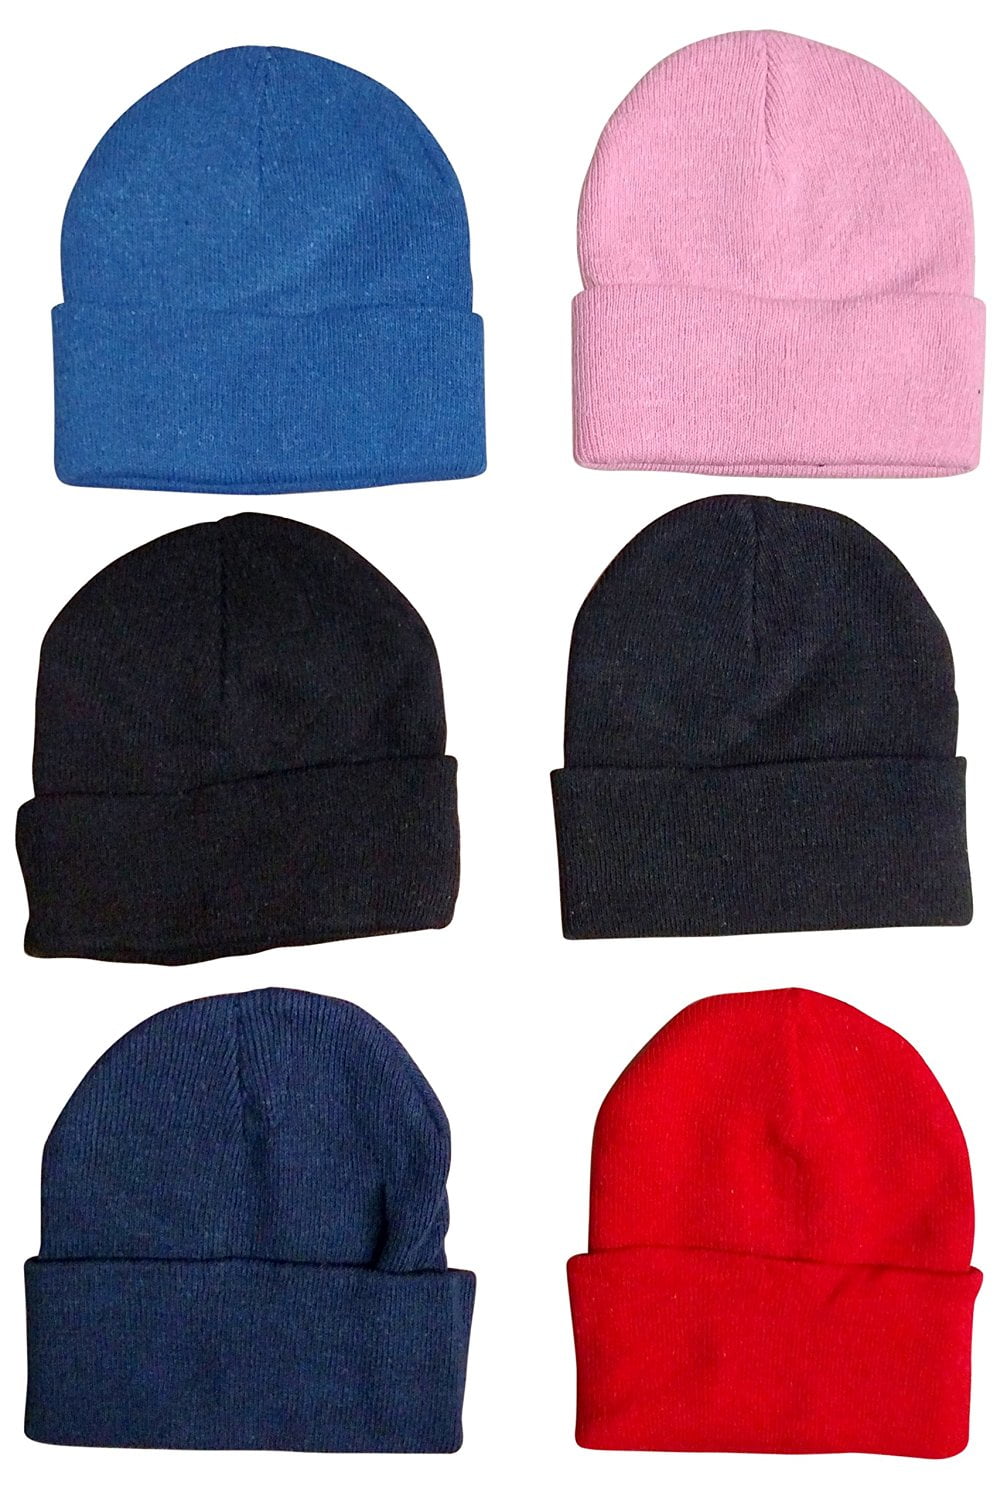 Yacht & Smith - 6 Pack Of excell Kids Winter Beanie Hat Assorted Colors ...